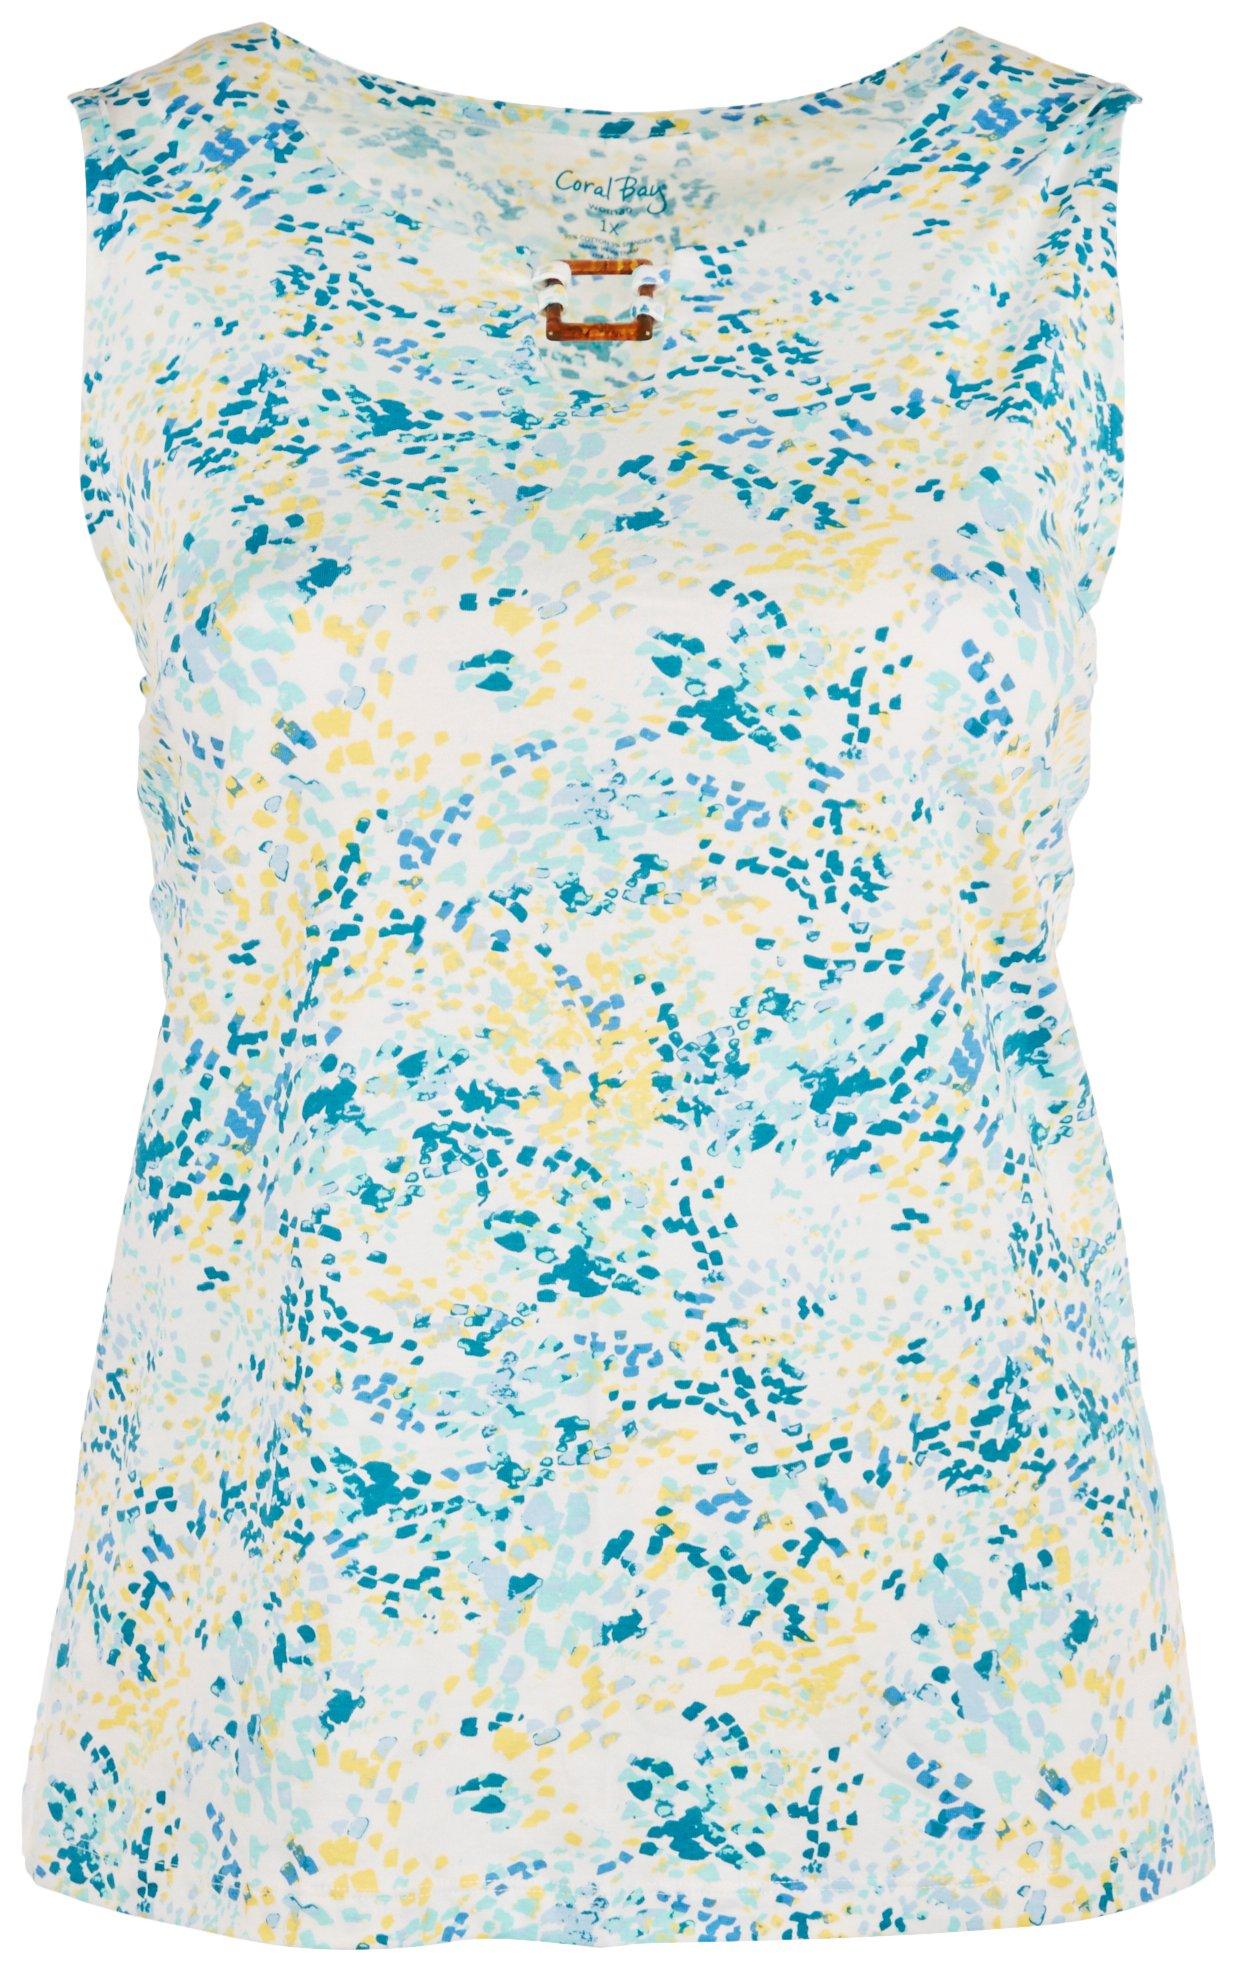 Coral Bay Plus Print Square Ring Sleeveless Top